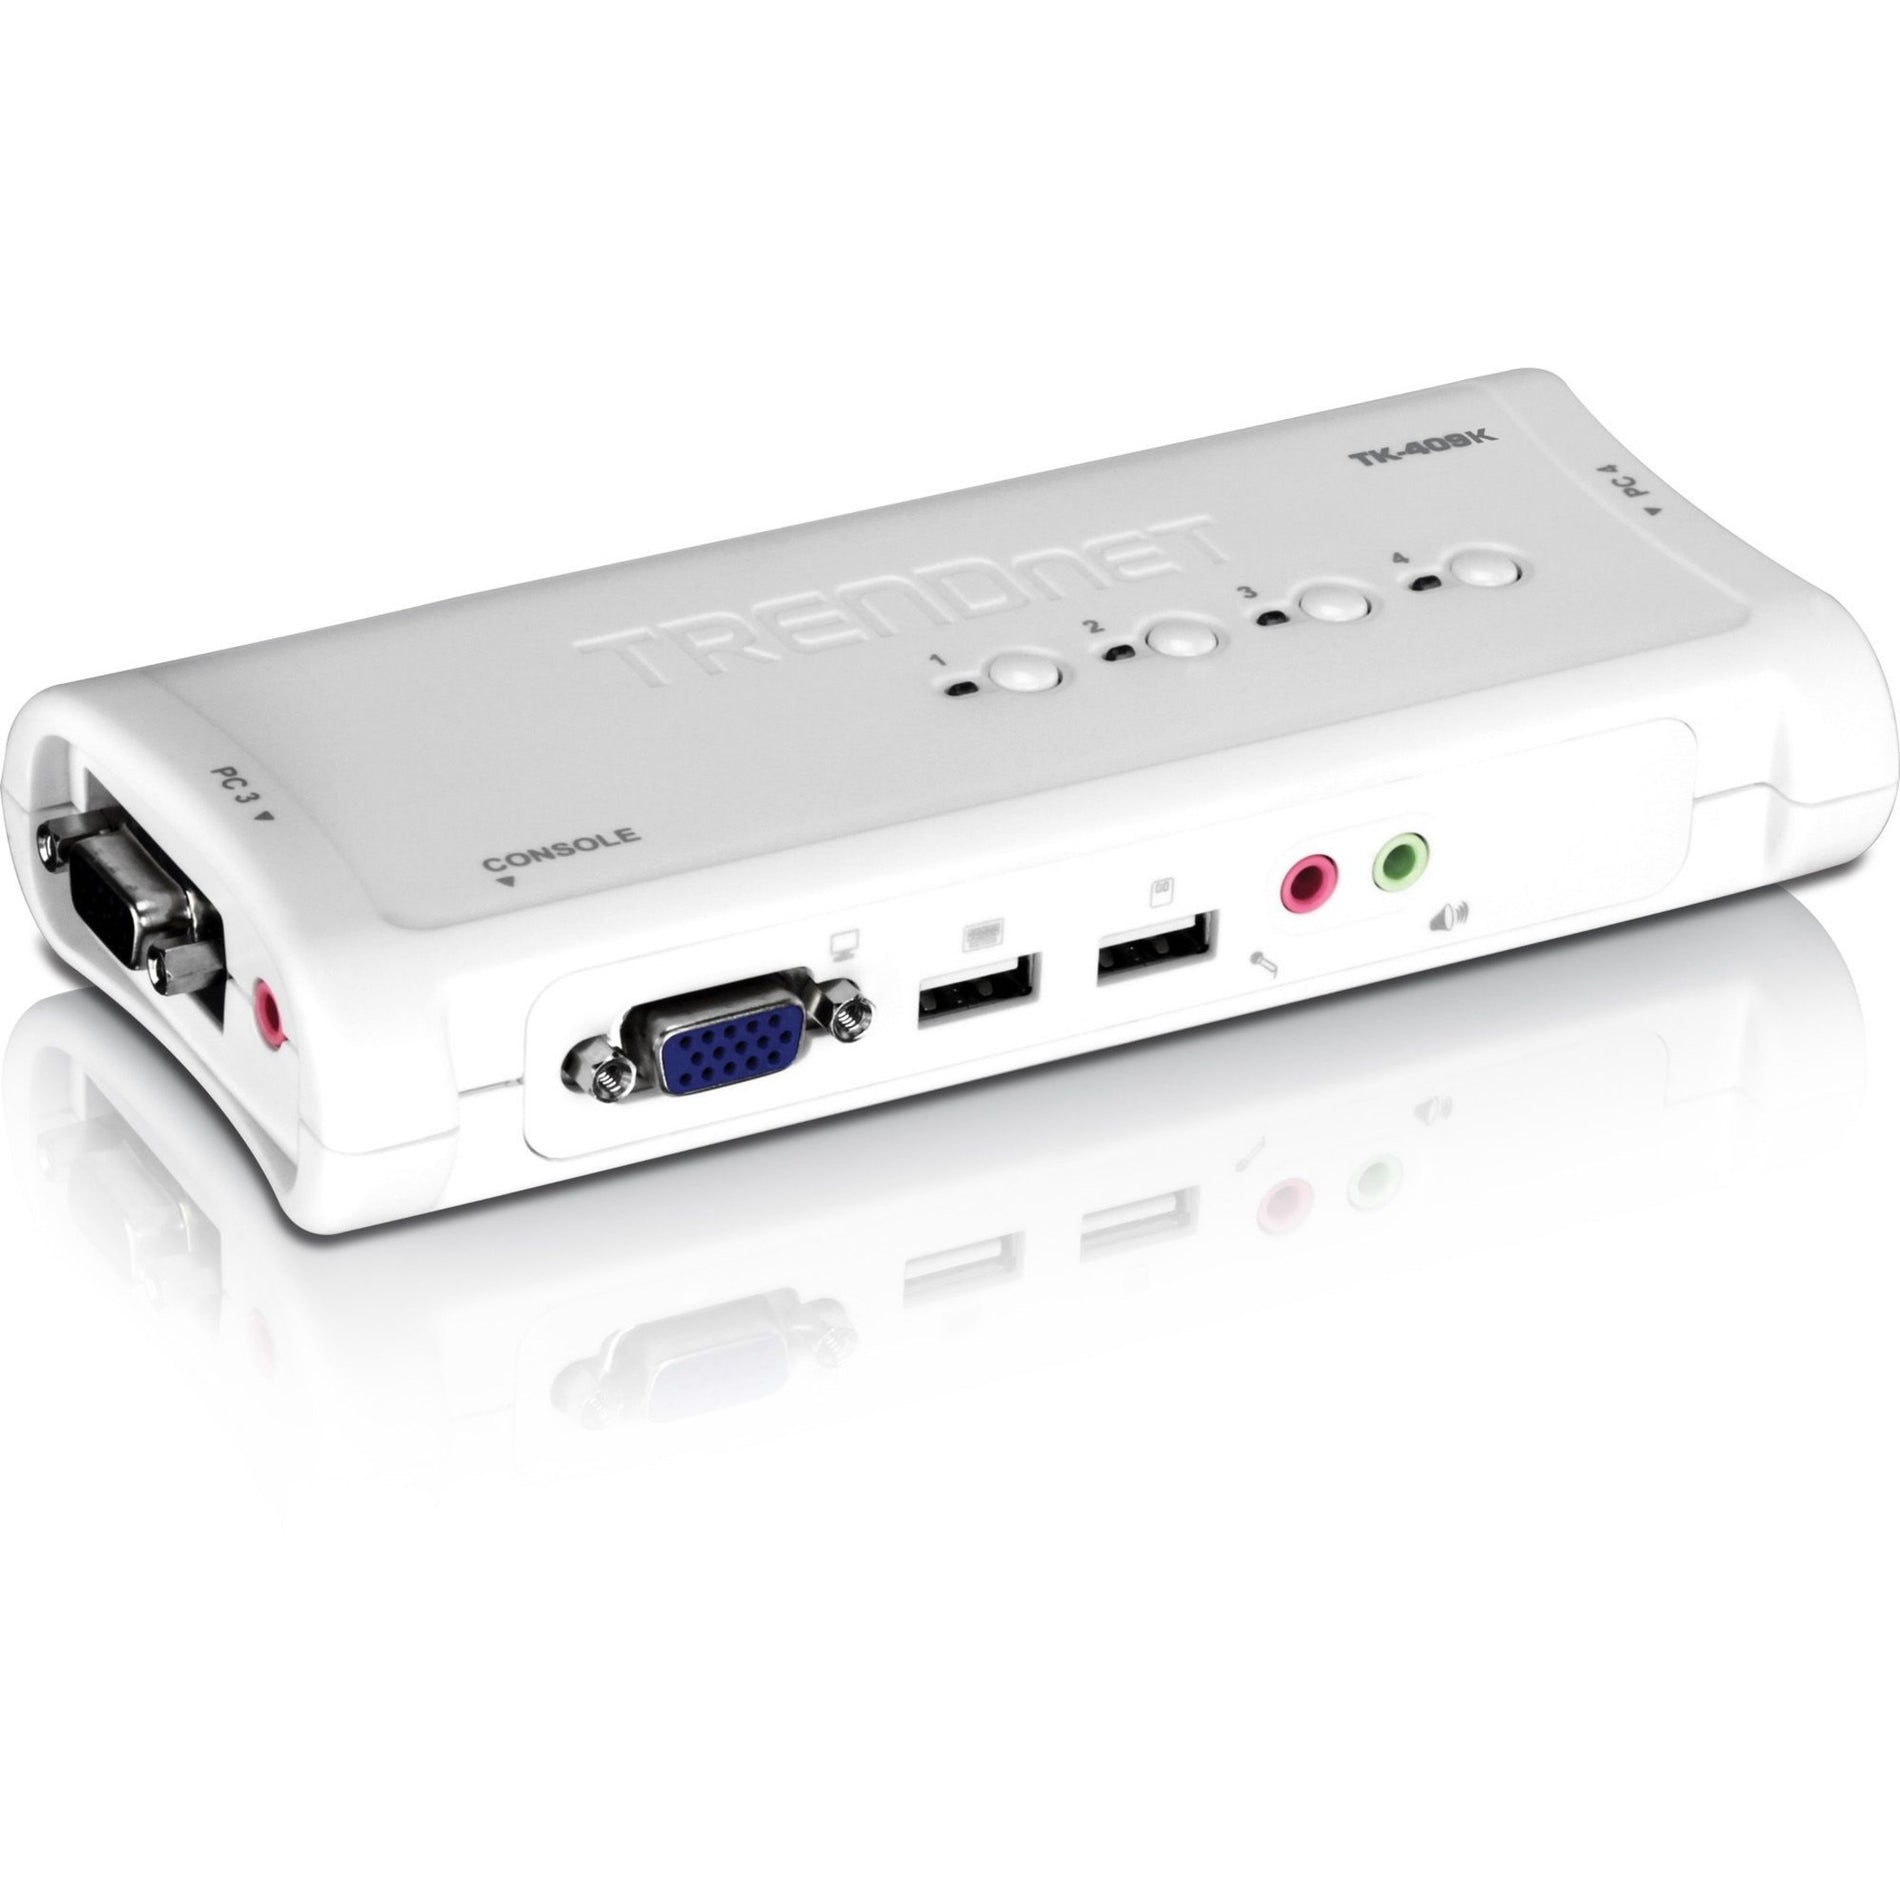 TRENDnet TK-409K 4-Port USB KVM Switch Kit with Audio, Manage 4 Computers, Plug and Play, Hot Pluggable